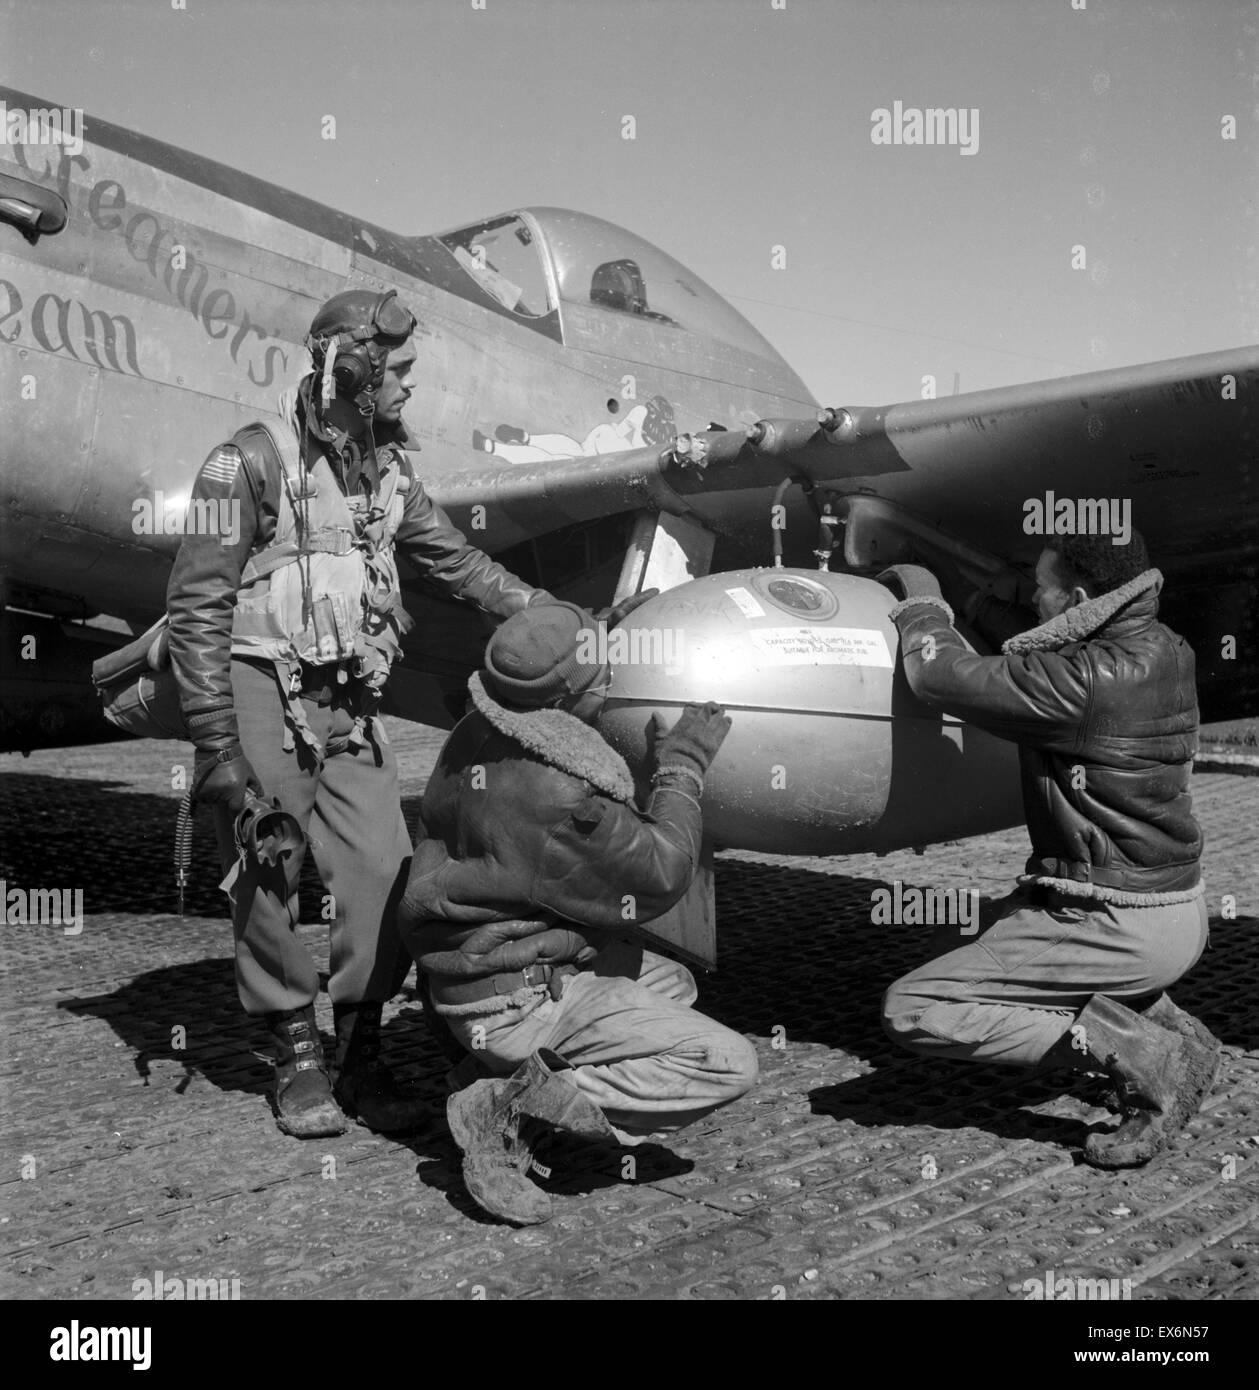 Photograph of Edward C. Gleed and two unidentified Tuskegee airmen, Ramitelli, Italy. Photographed by Toni Frissell (1907-1988). Dated 1945 Stock Photo